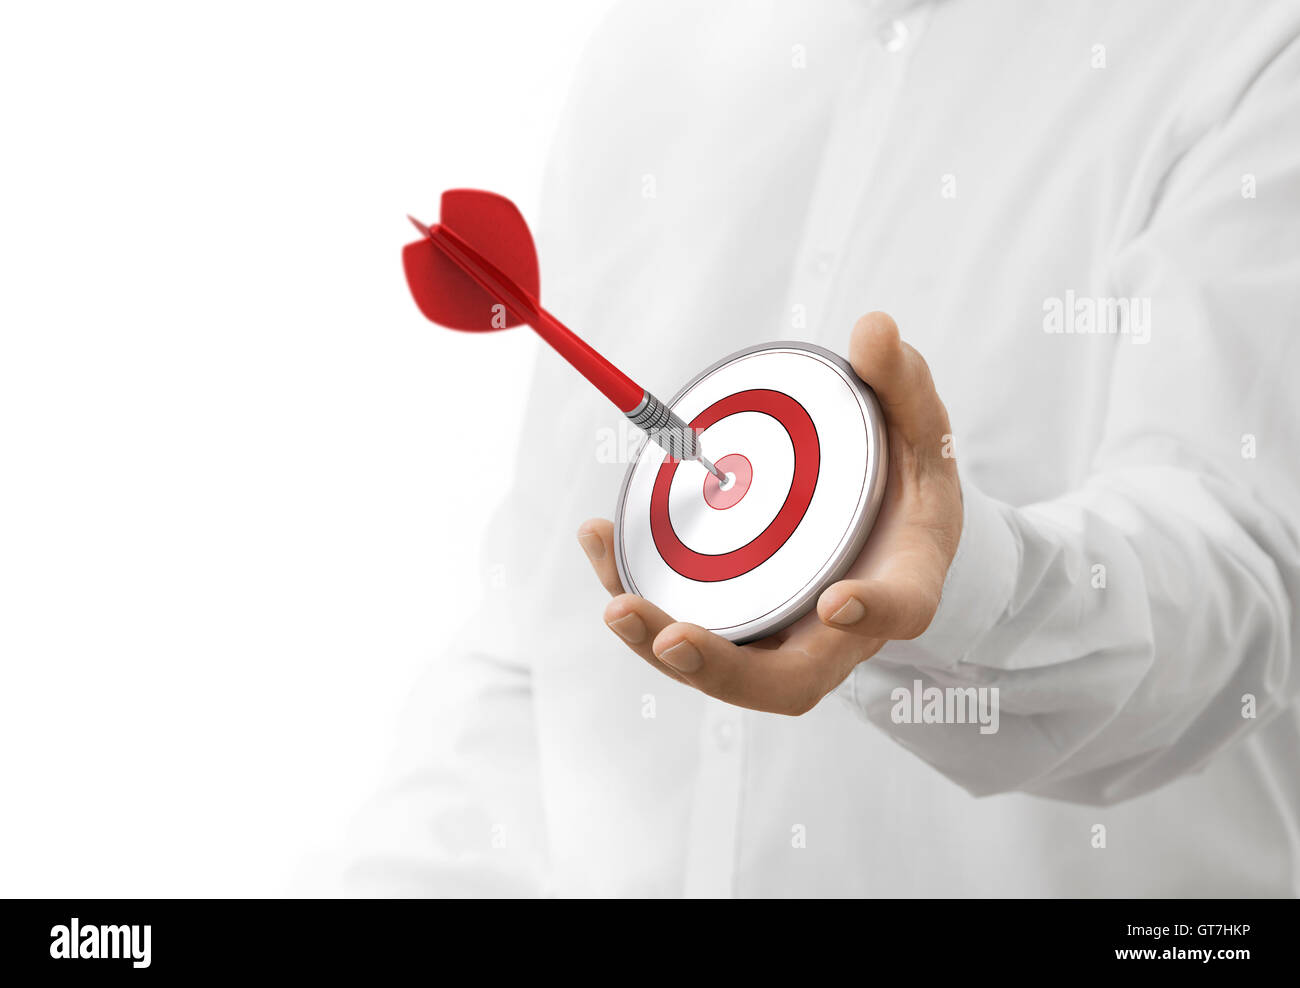 caucasian man holding a modern target with a dart in the center. image over white background. Concept of objective attainment. Stock Photo